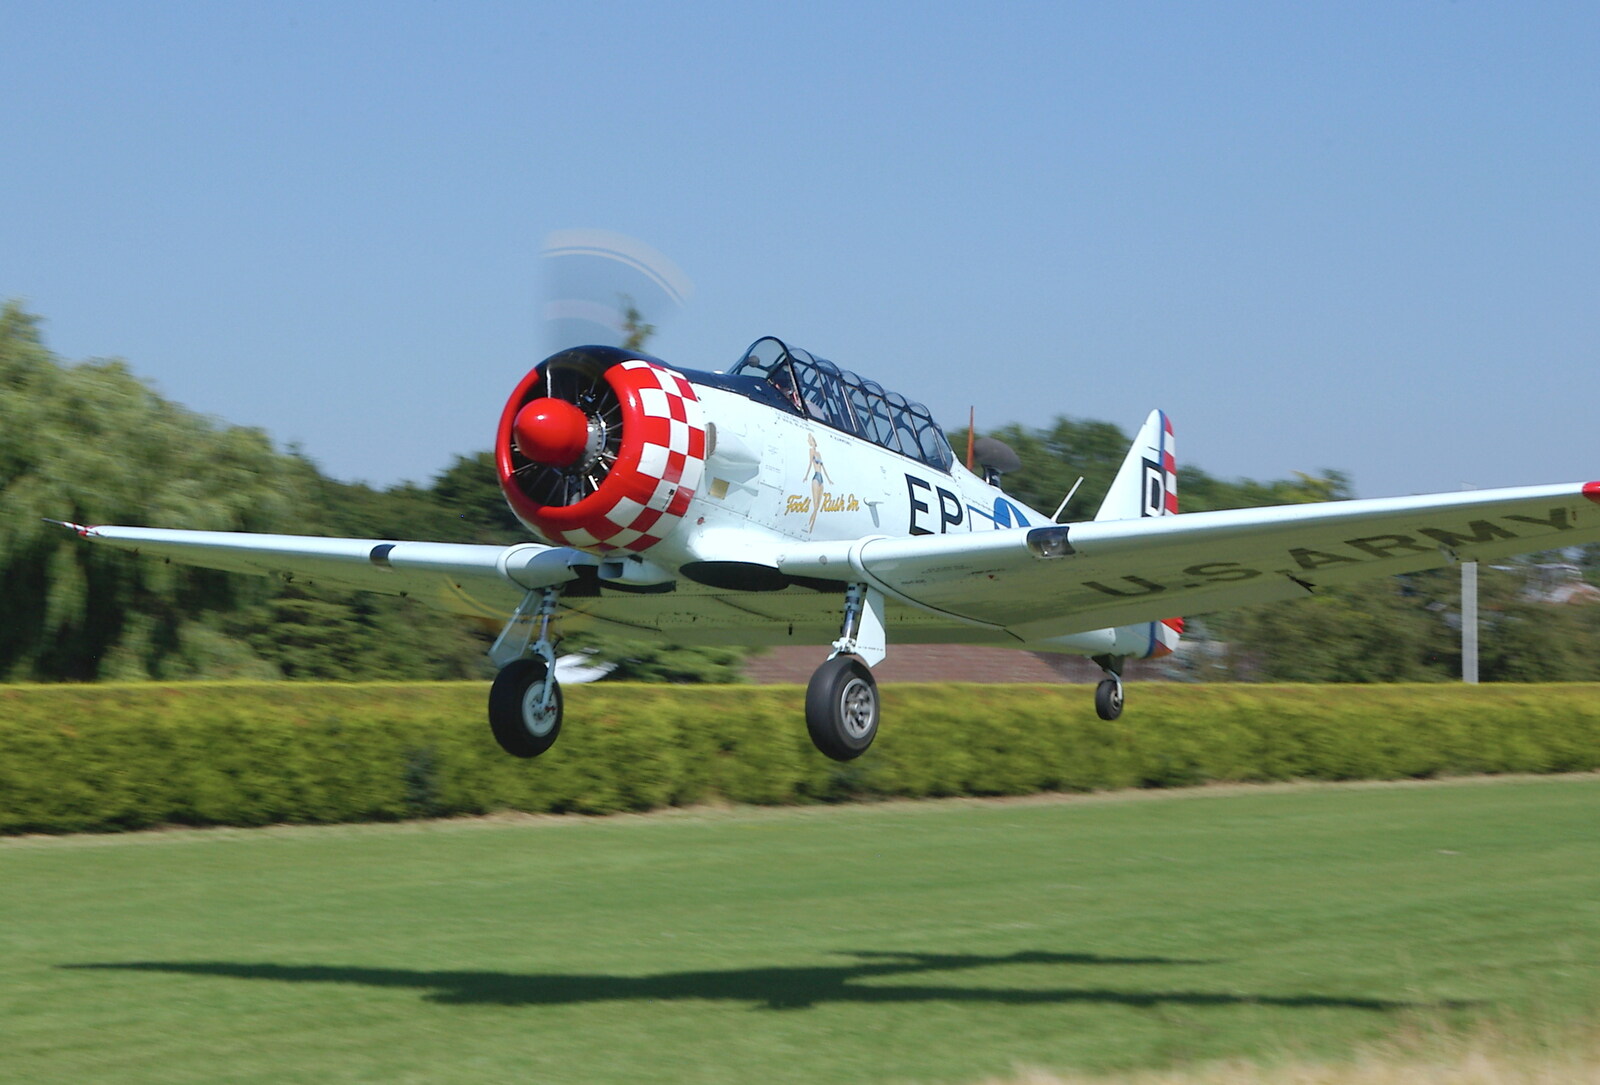 The Harvard takes off to do Thurston airshow from A Day With Janie the P-51D Mustang, Hardwick Airfield, Norfolk - 17th July 2005